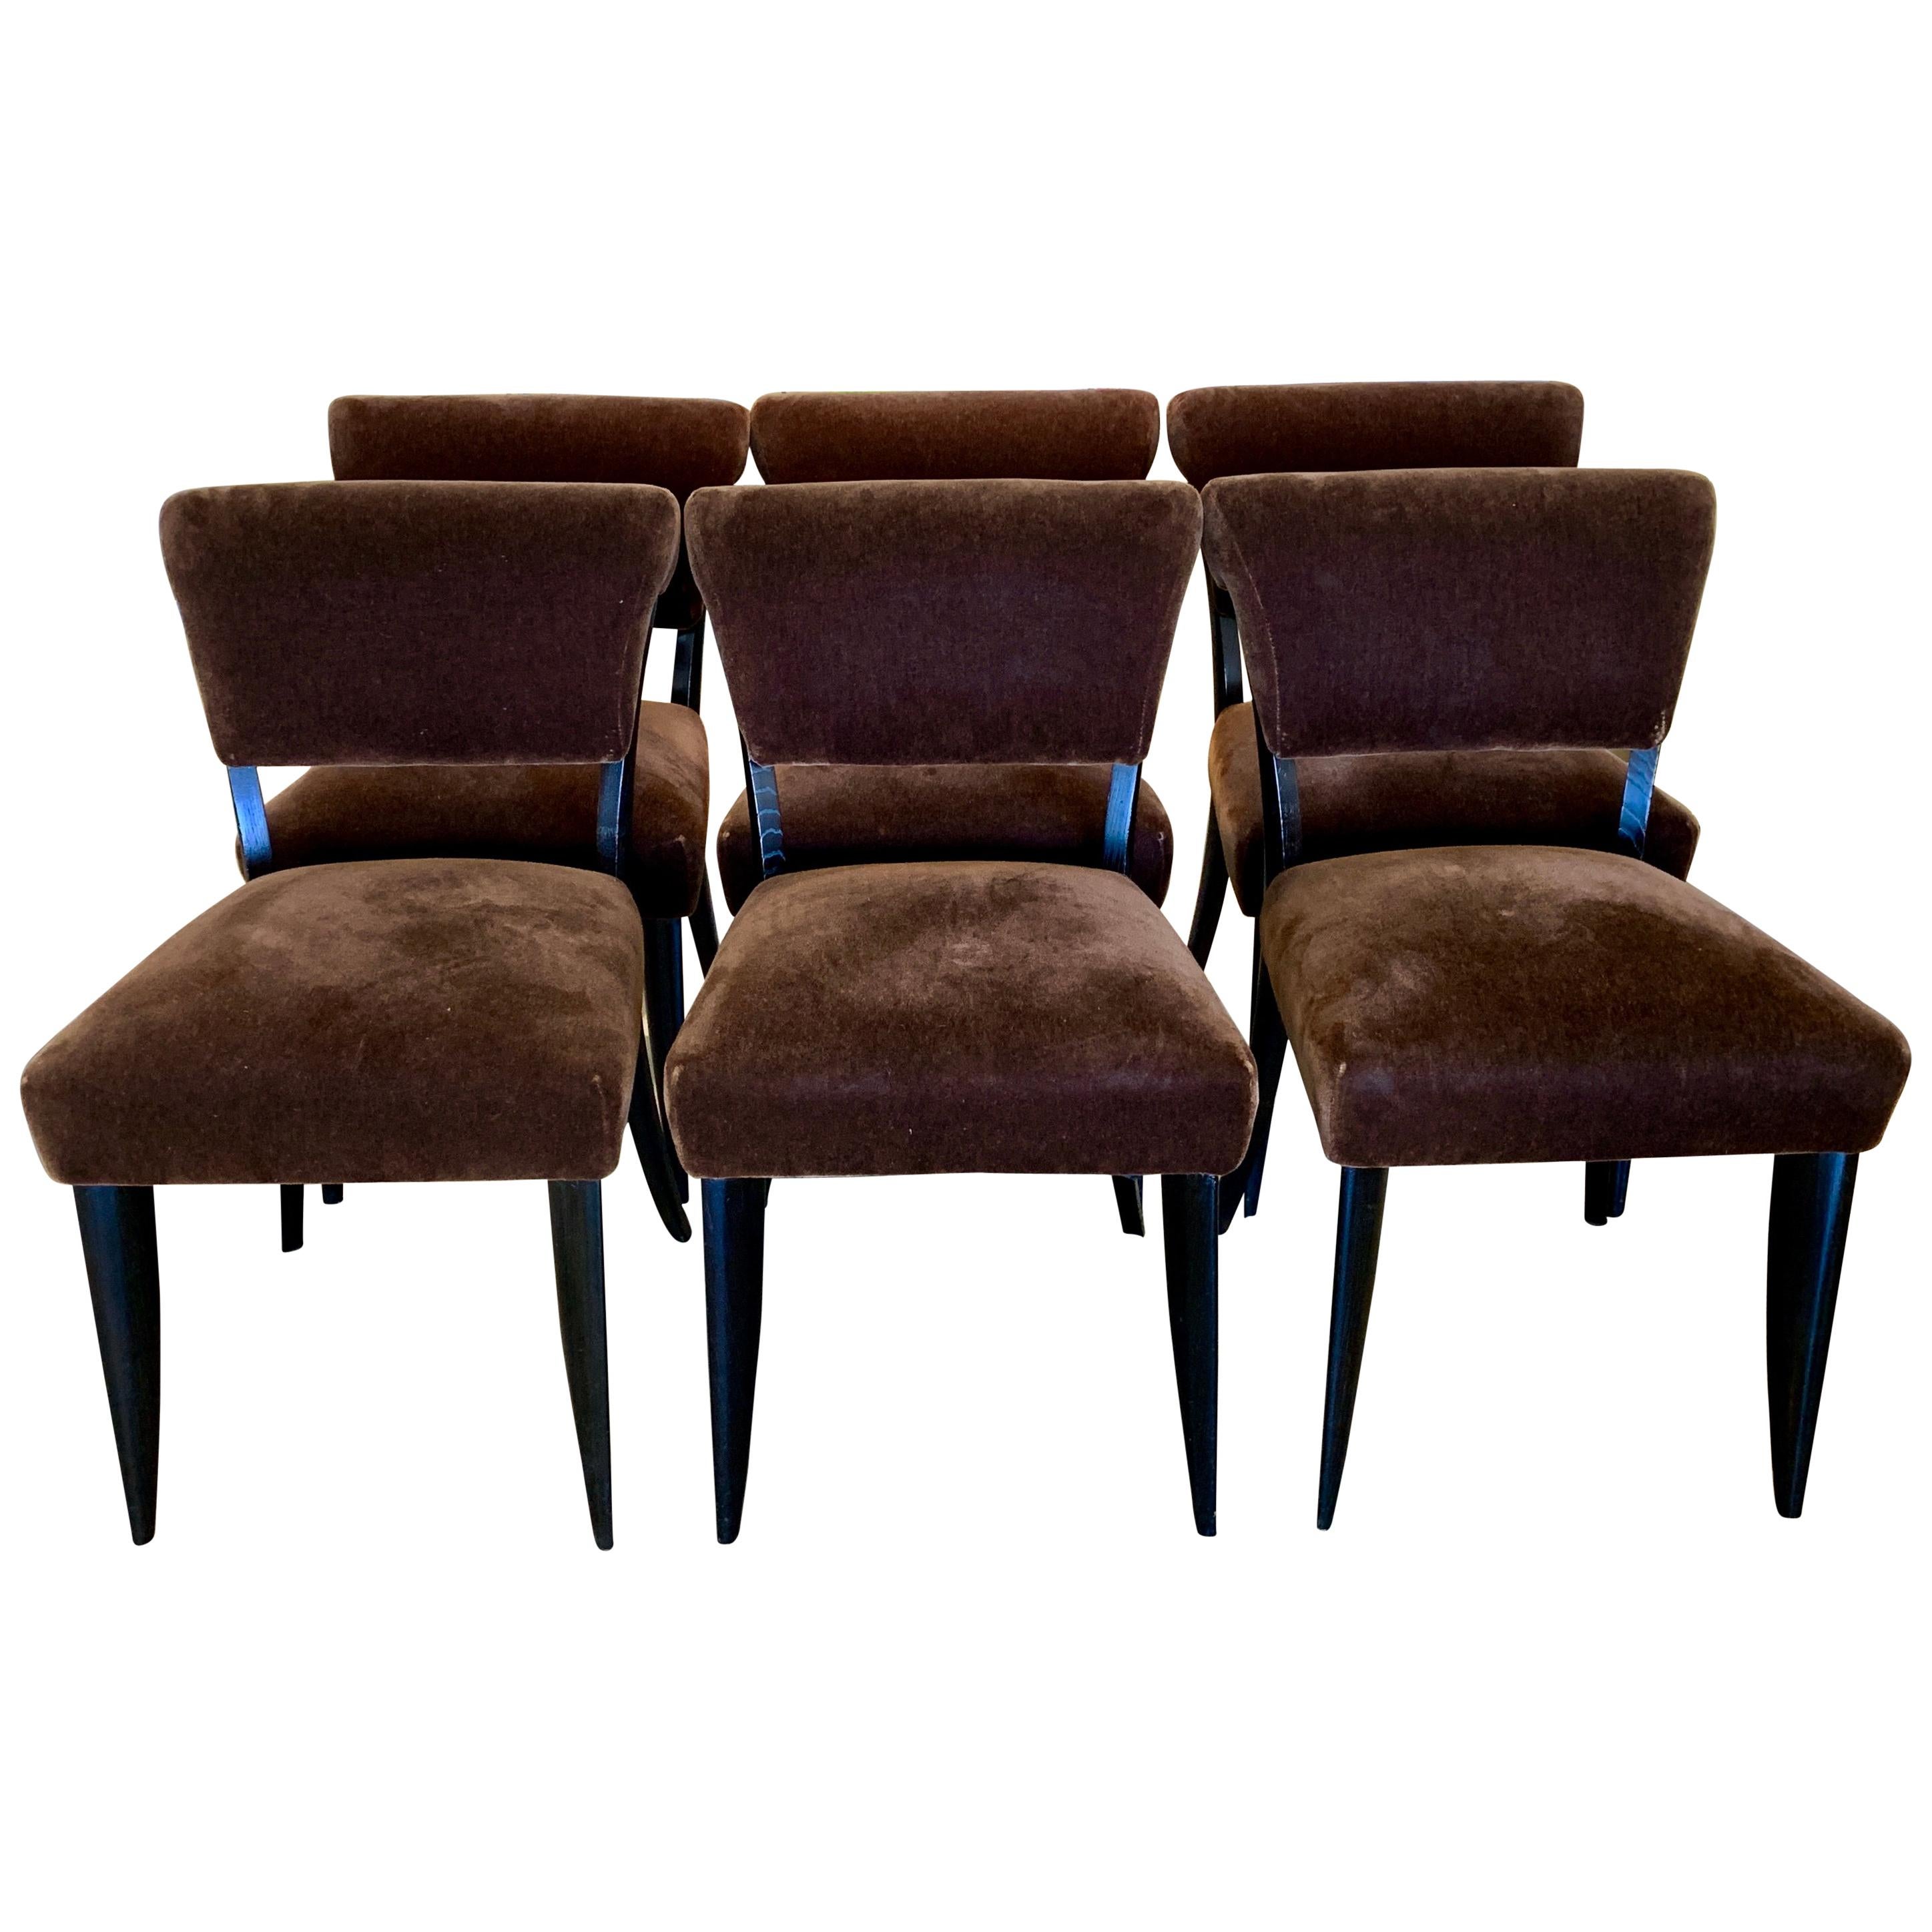 6 Art Deco Period Dining Chairs in the Style of Ruhlmann